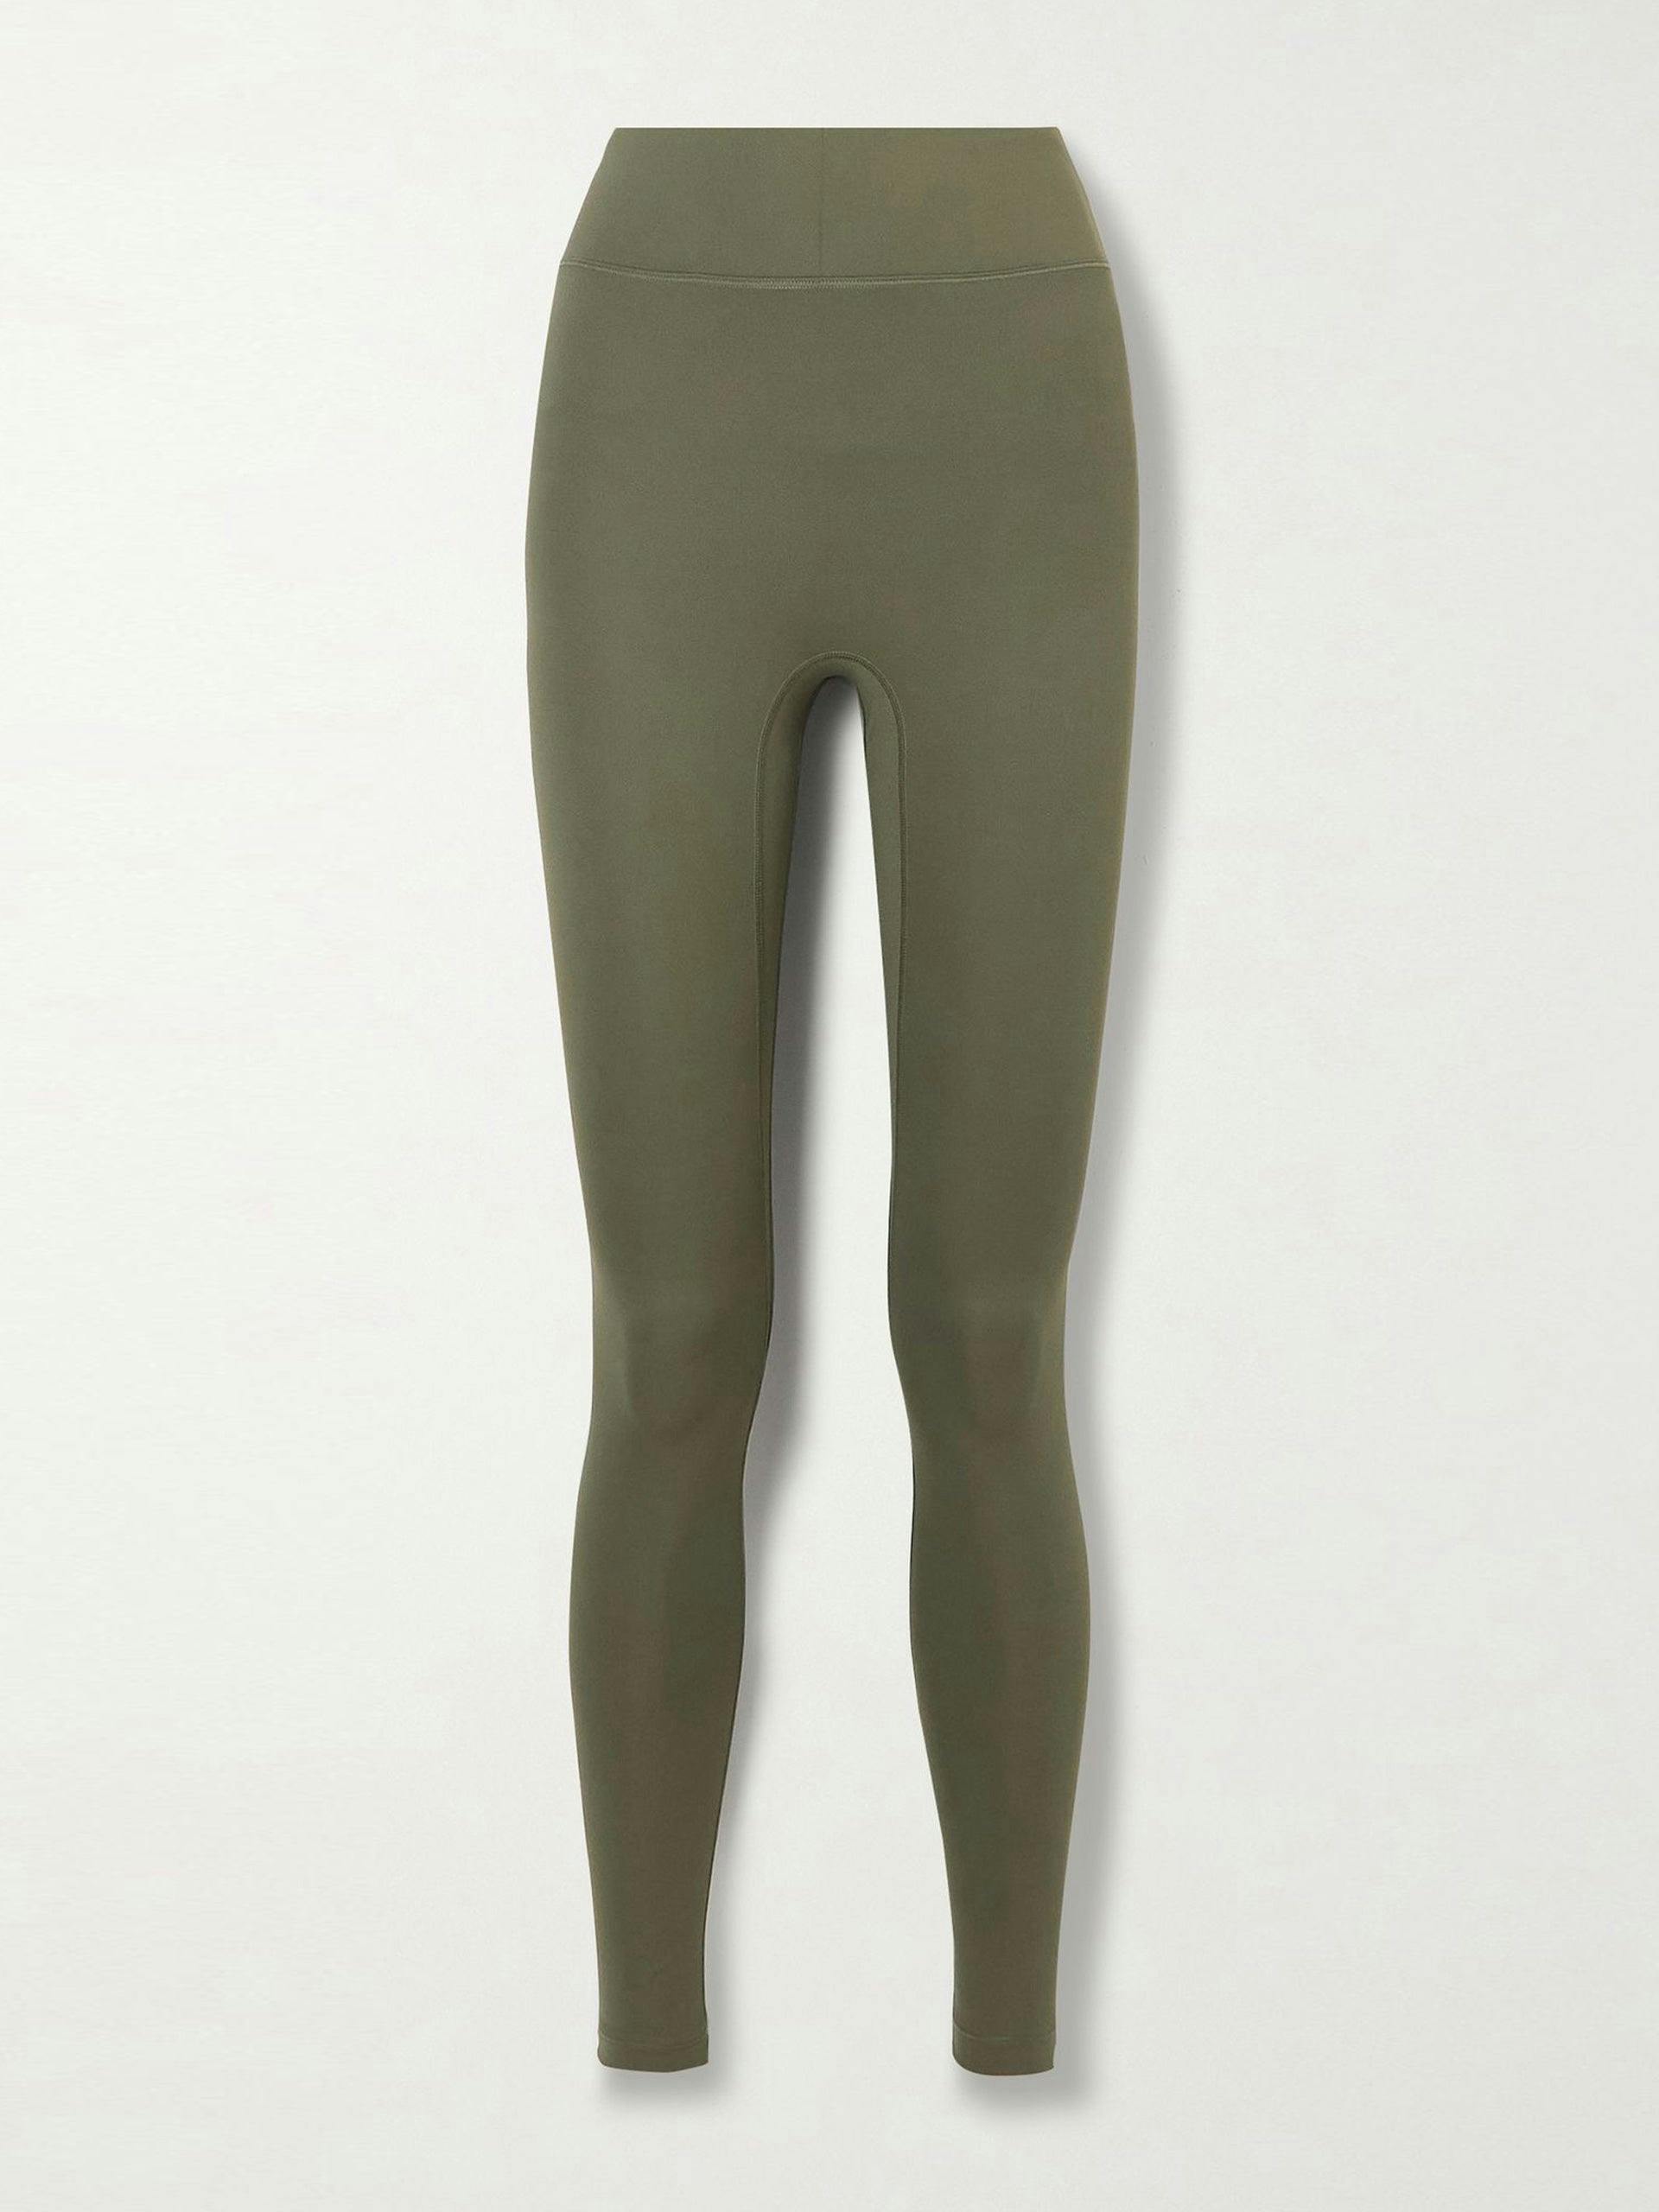 Center Stage ribbed stretch leggings